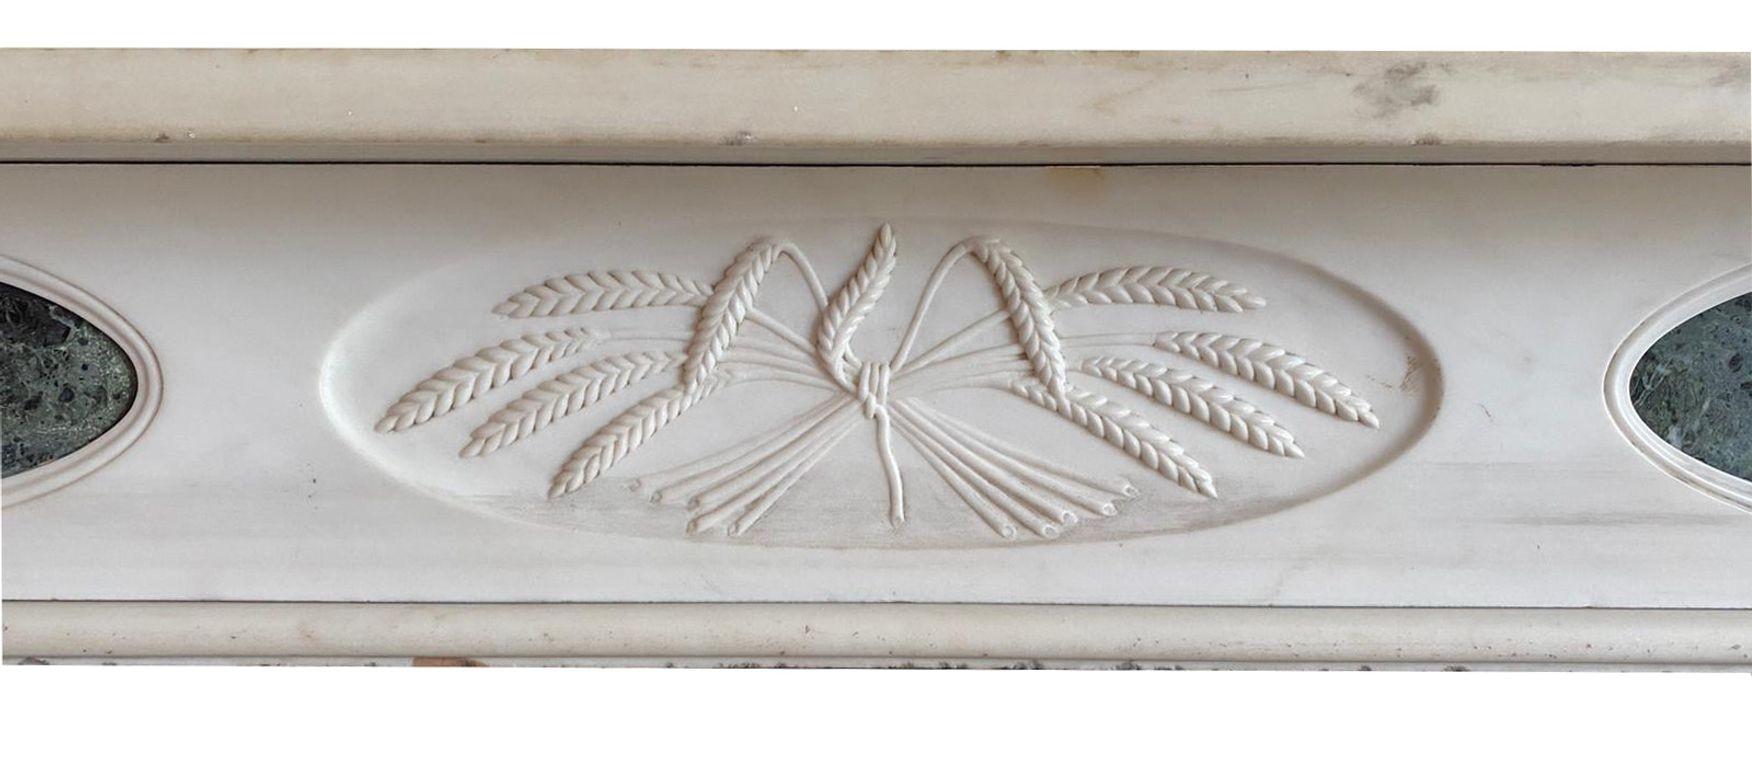 Regency Period Marble English Mantel In Fair Condition For Sale In Wormelow, Herefordshire